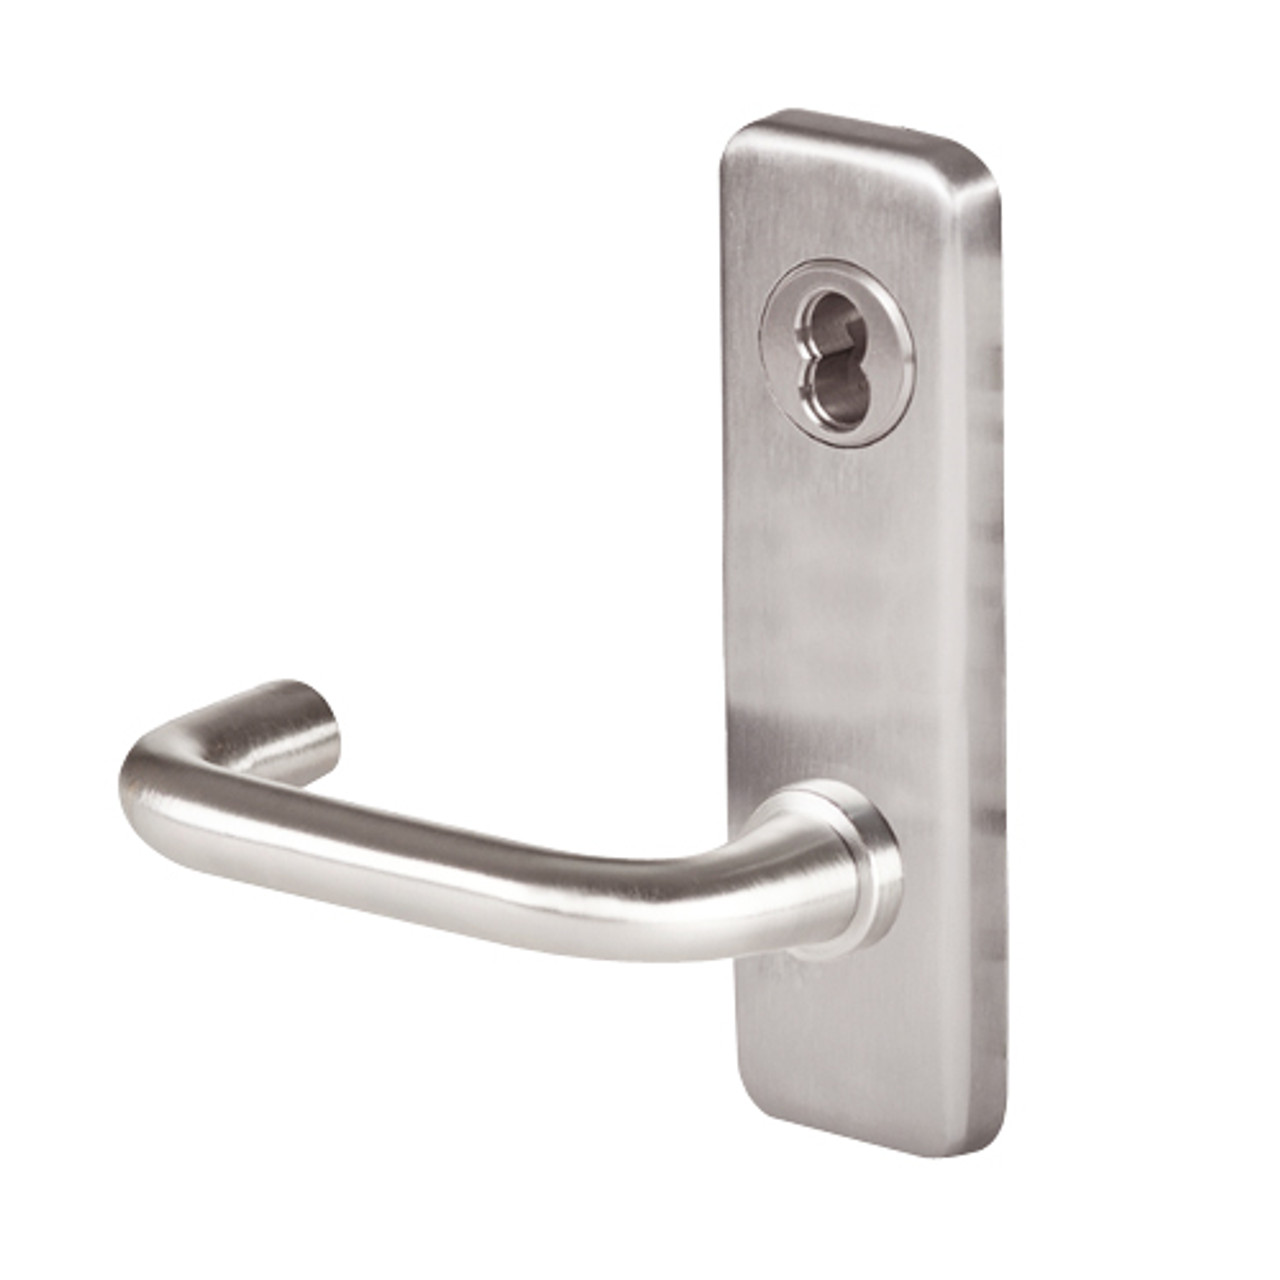 45H7B3J629 Best 40H Series Entrance with Deadbolt Heavy Duty Mortise Lever Lock with Solid Tube Return Style in Bright Stainless Steel